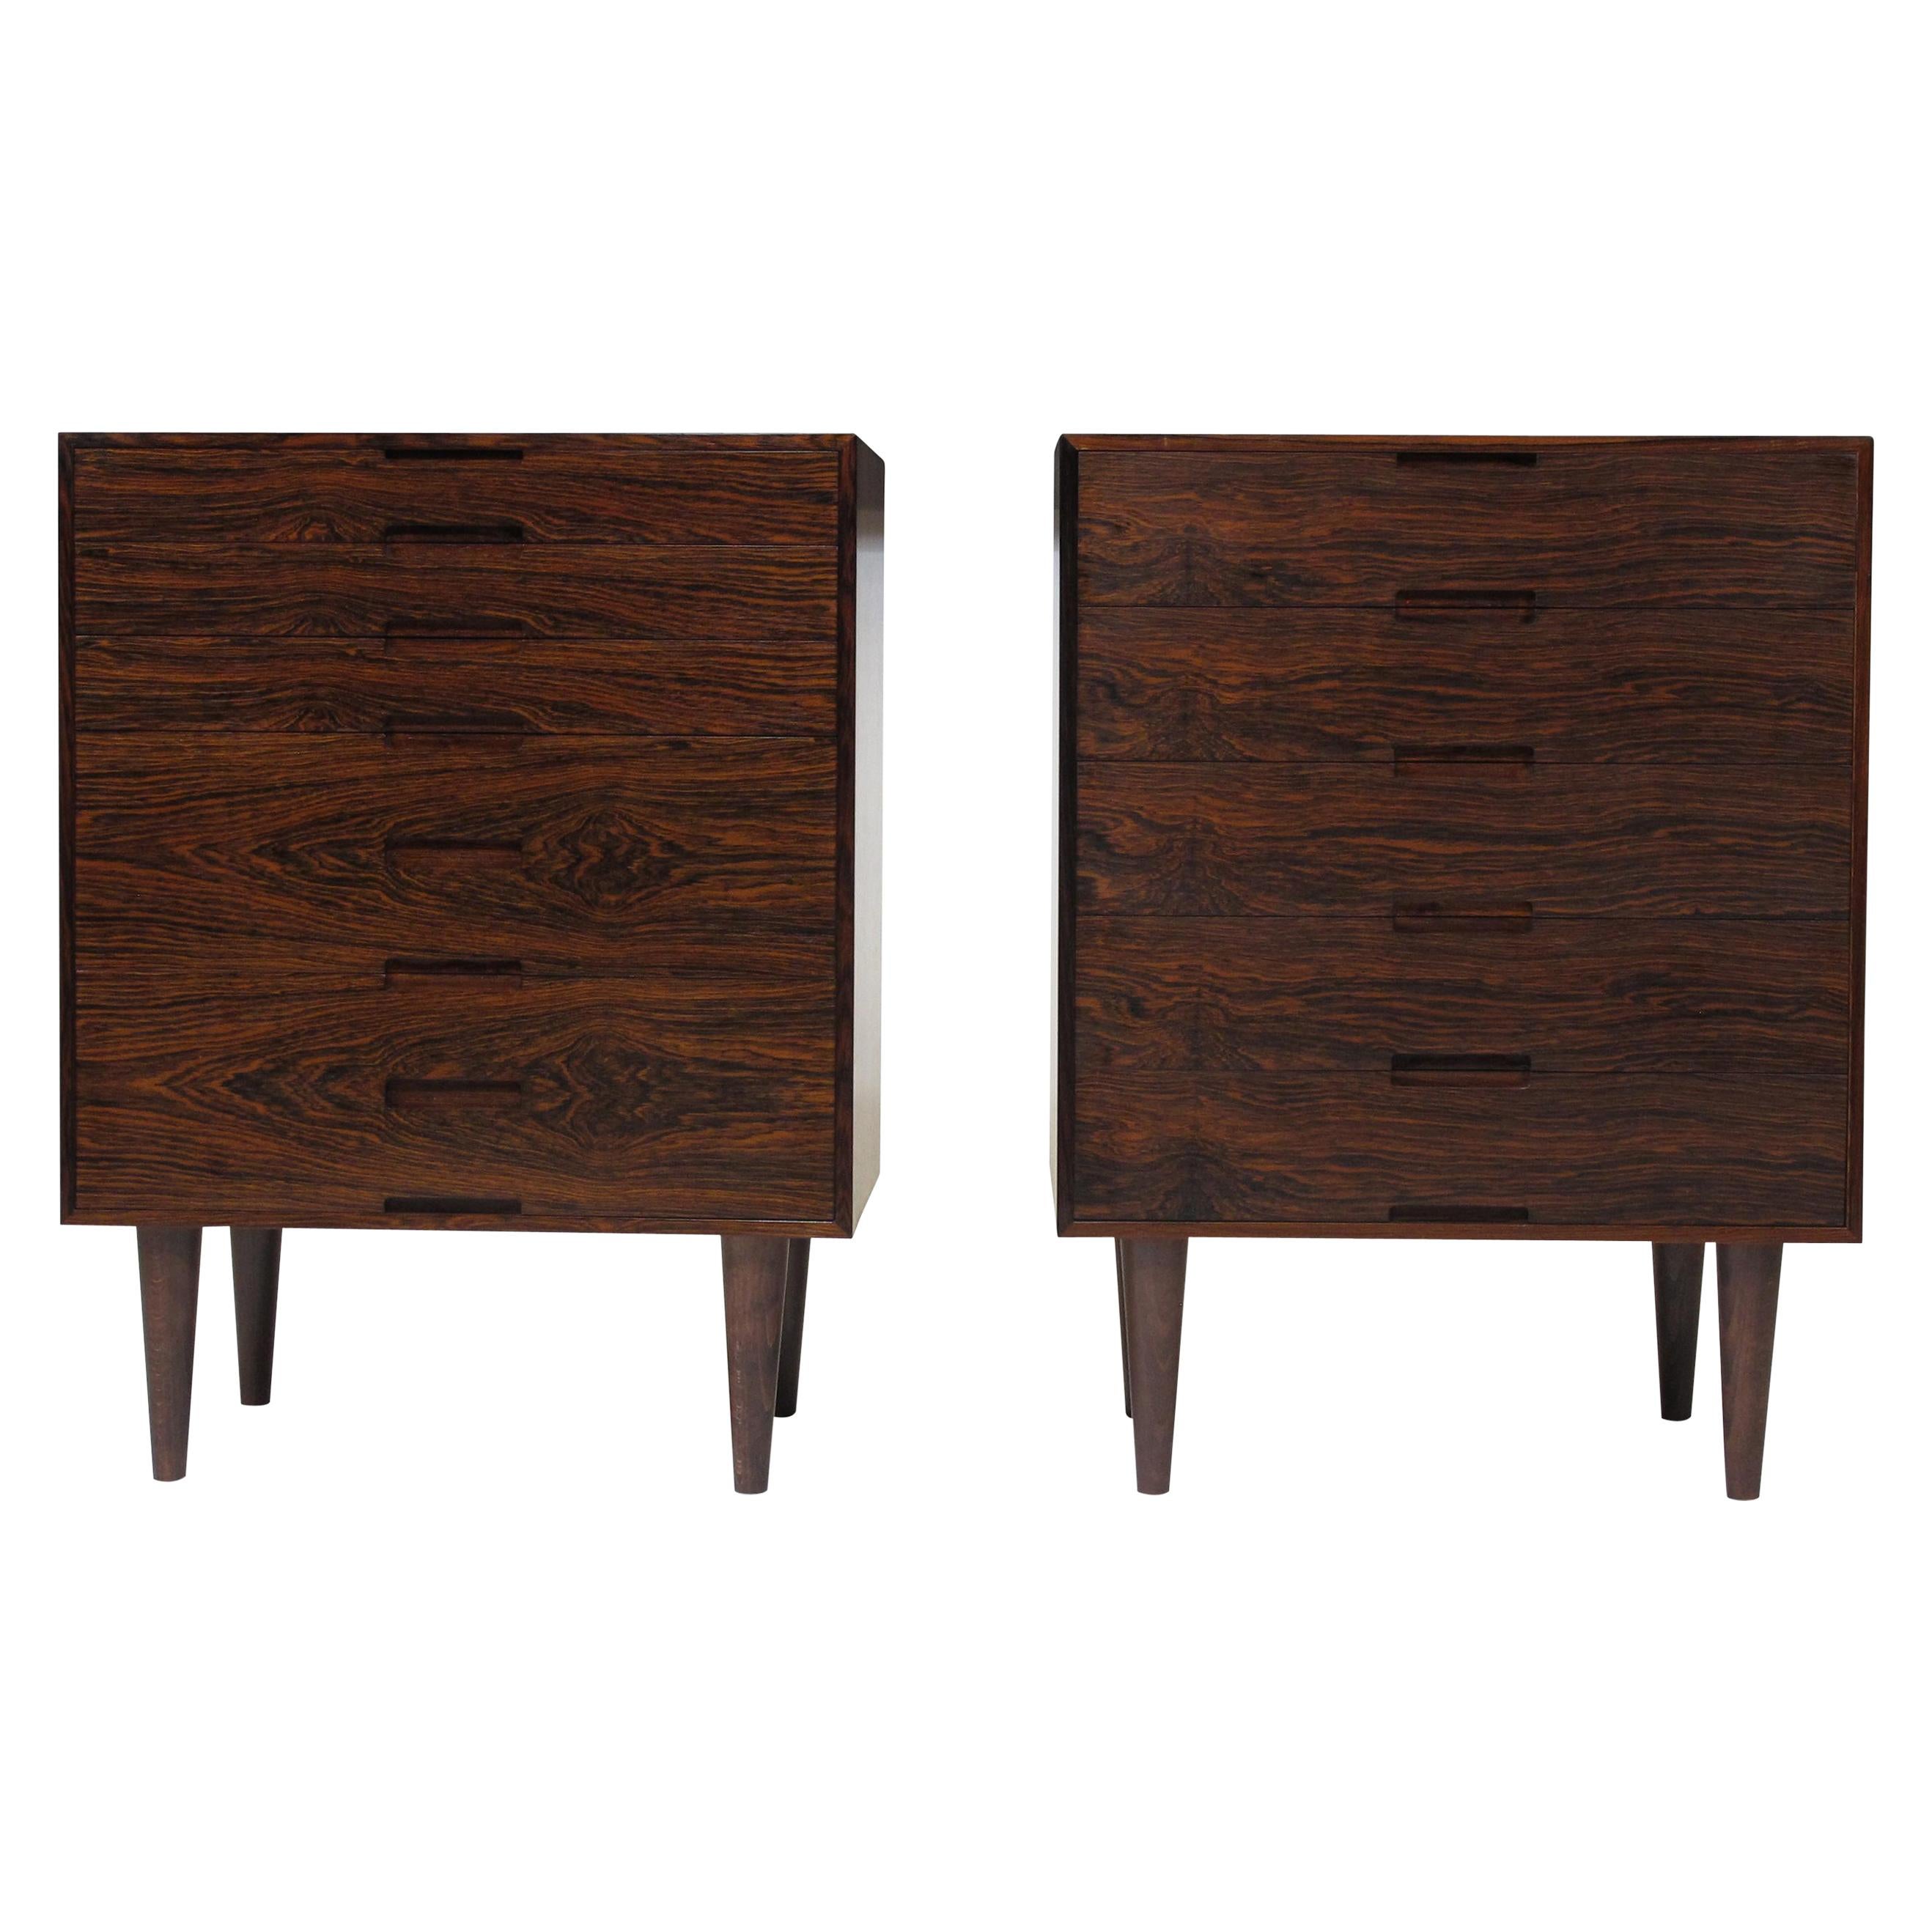 Brazilian Rosewood Nightstand Cabinets, a Pair